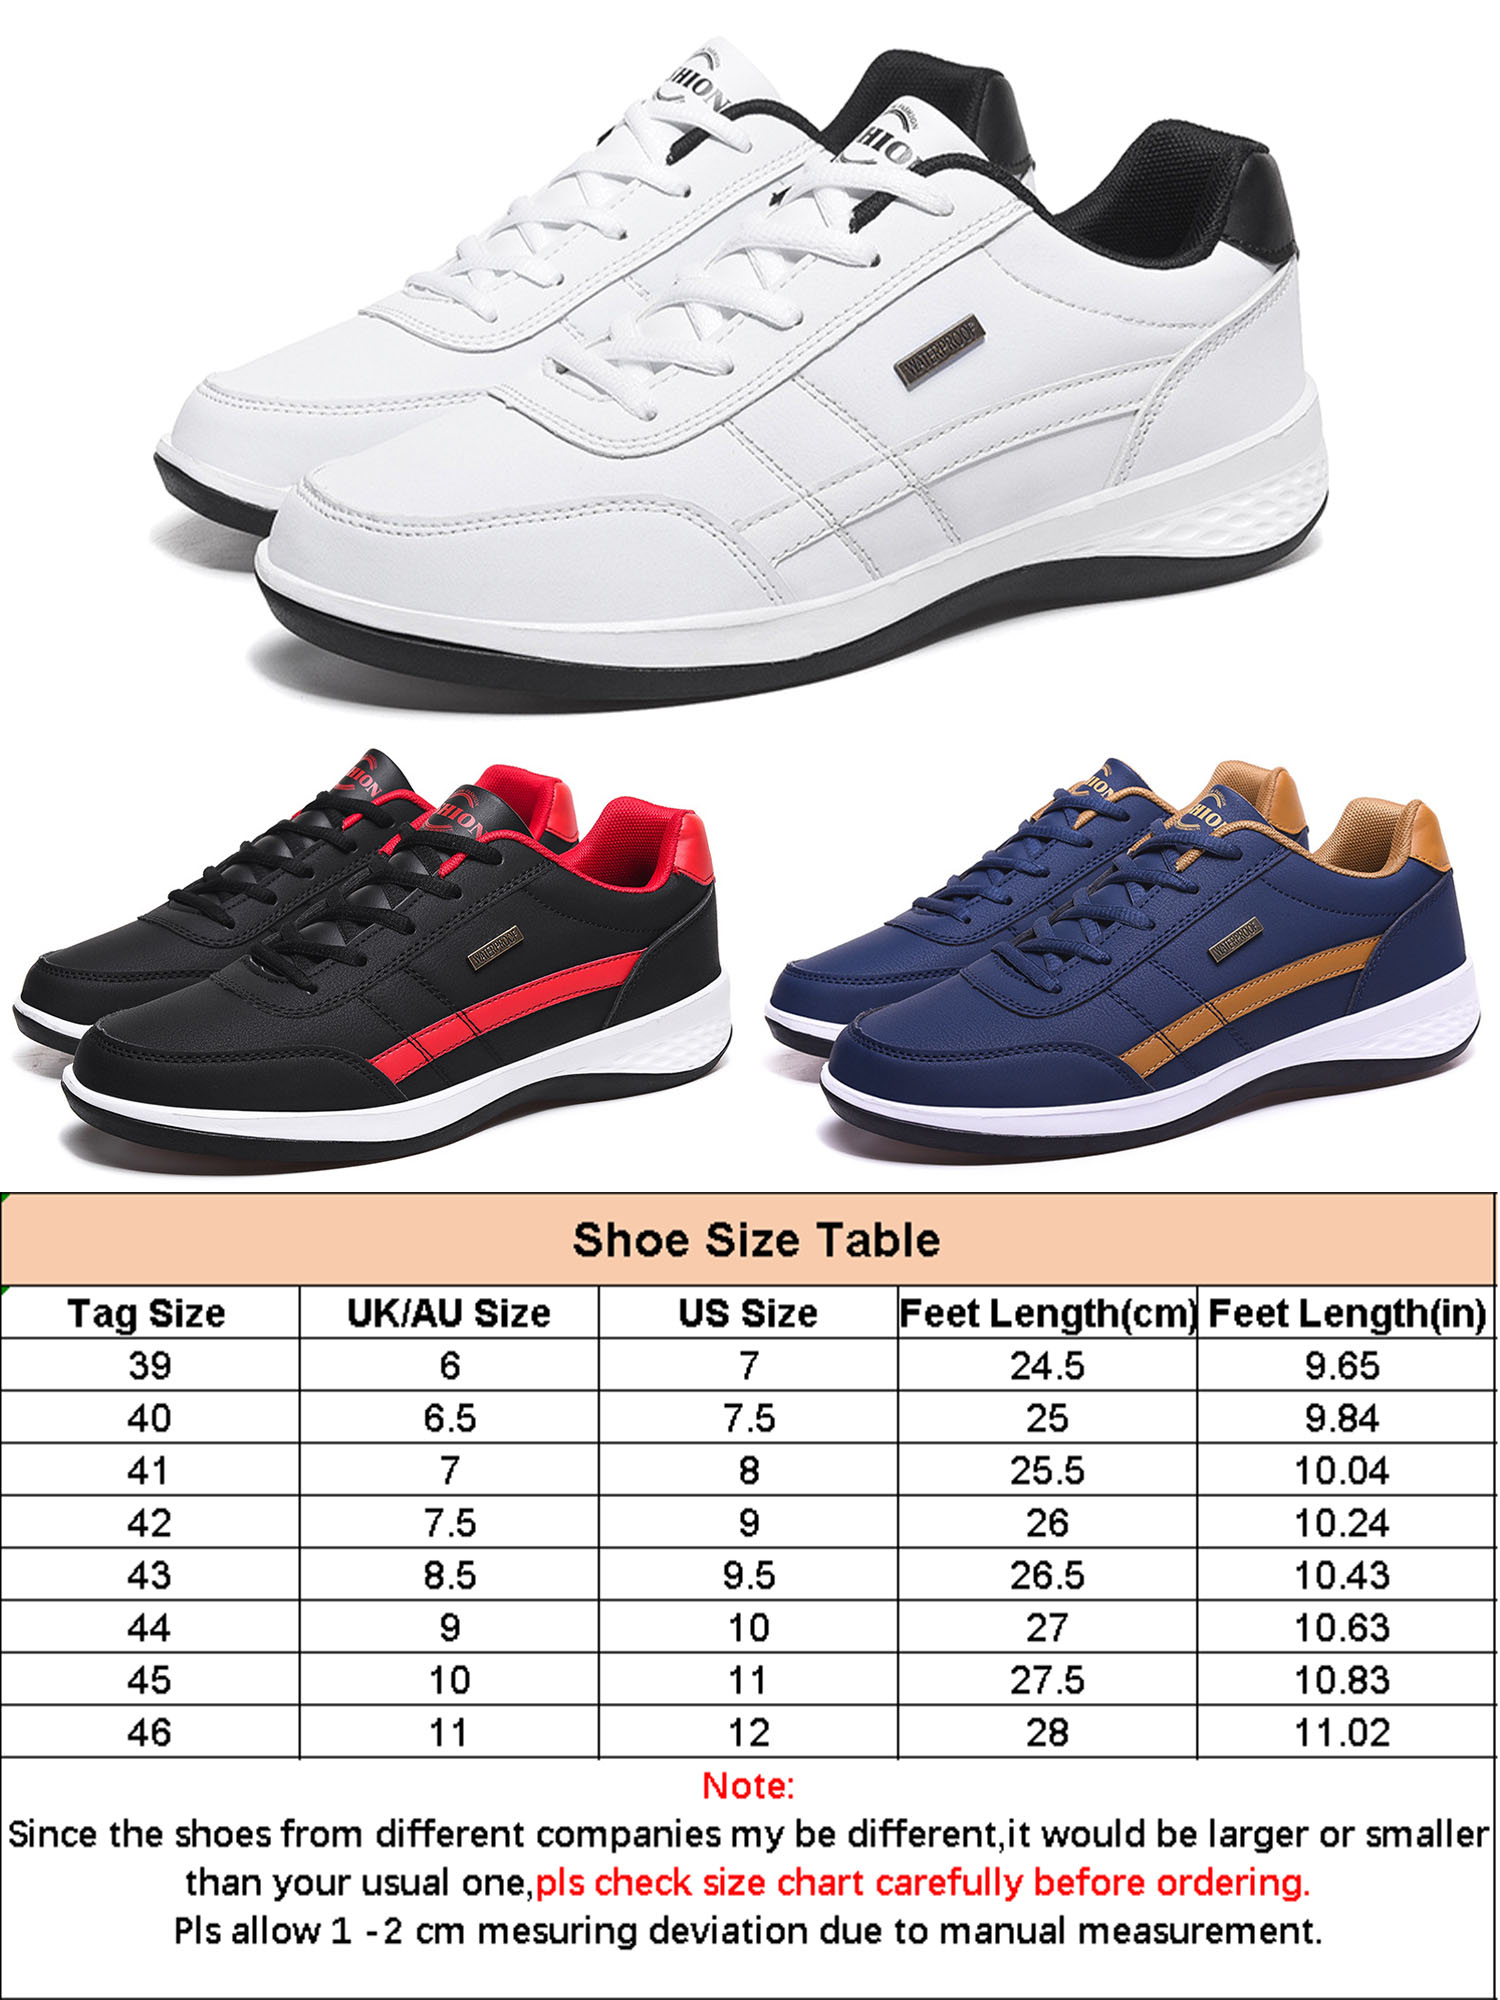 Avamo Casual Sneakers Men's Athletic Running Trainers Sports Tennis Fitness Shoes Gym White US 12 1 Pair - image 2 of 5